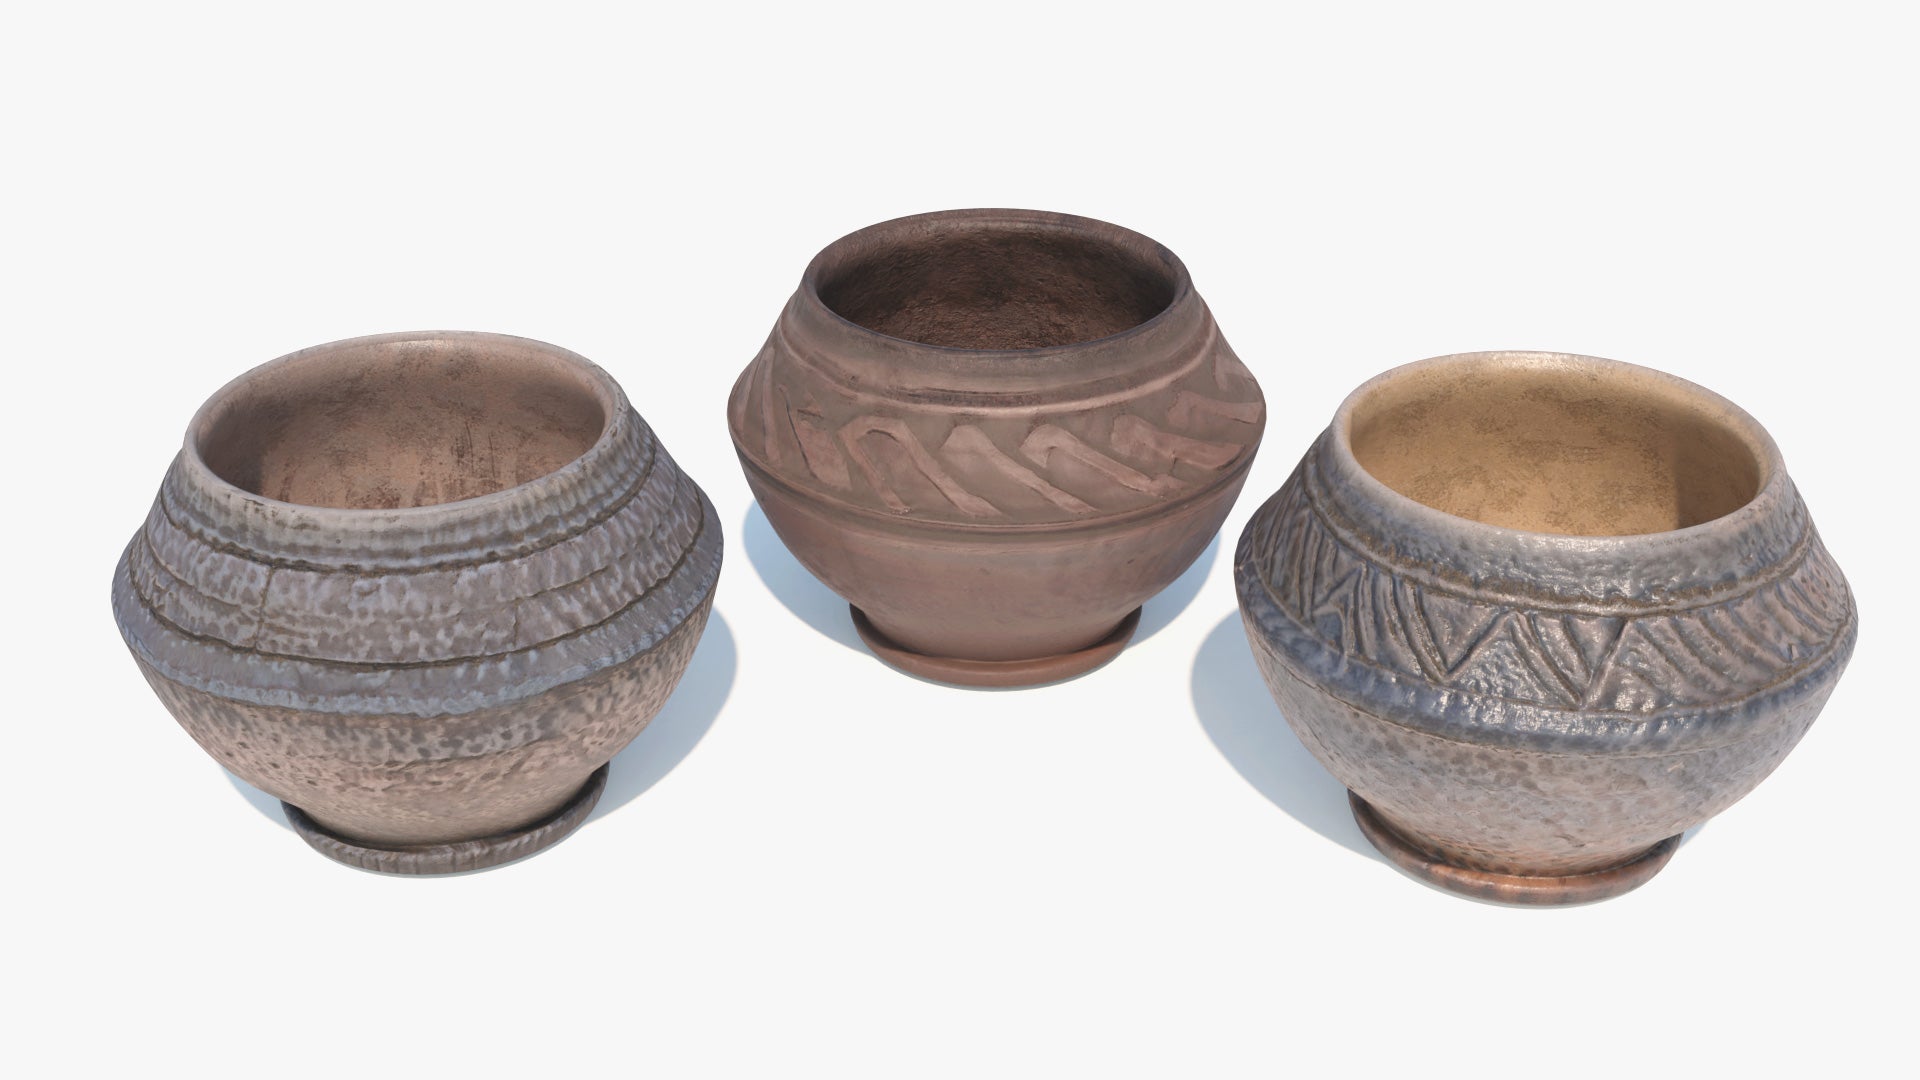 3D model of three almond shaped clay vessels, two of the rough and one of them painted with enamel, they have very rich textures that seem scratchy but also smooth. Low polycount and PBR textures make the render look hyper realistic